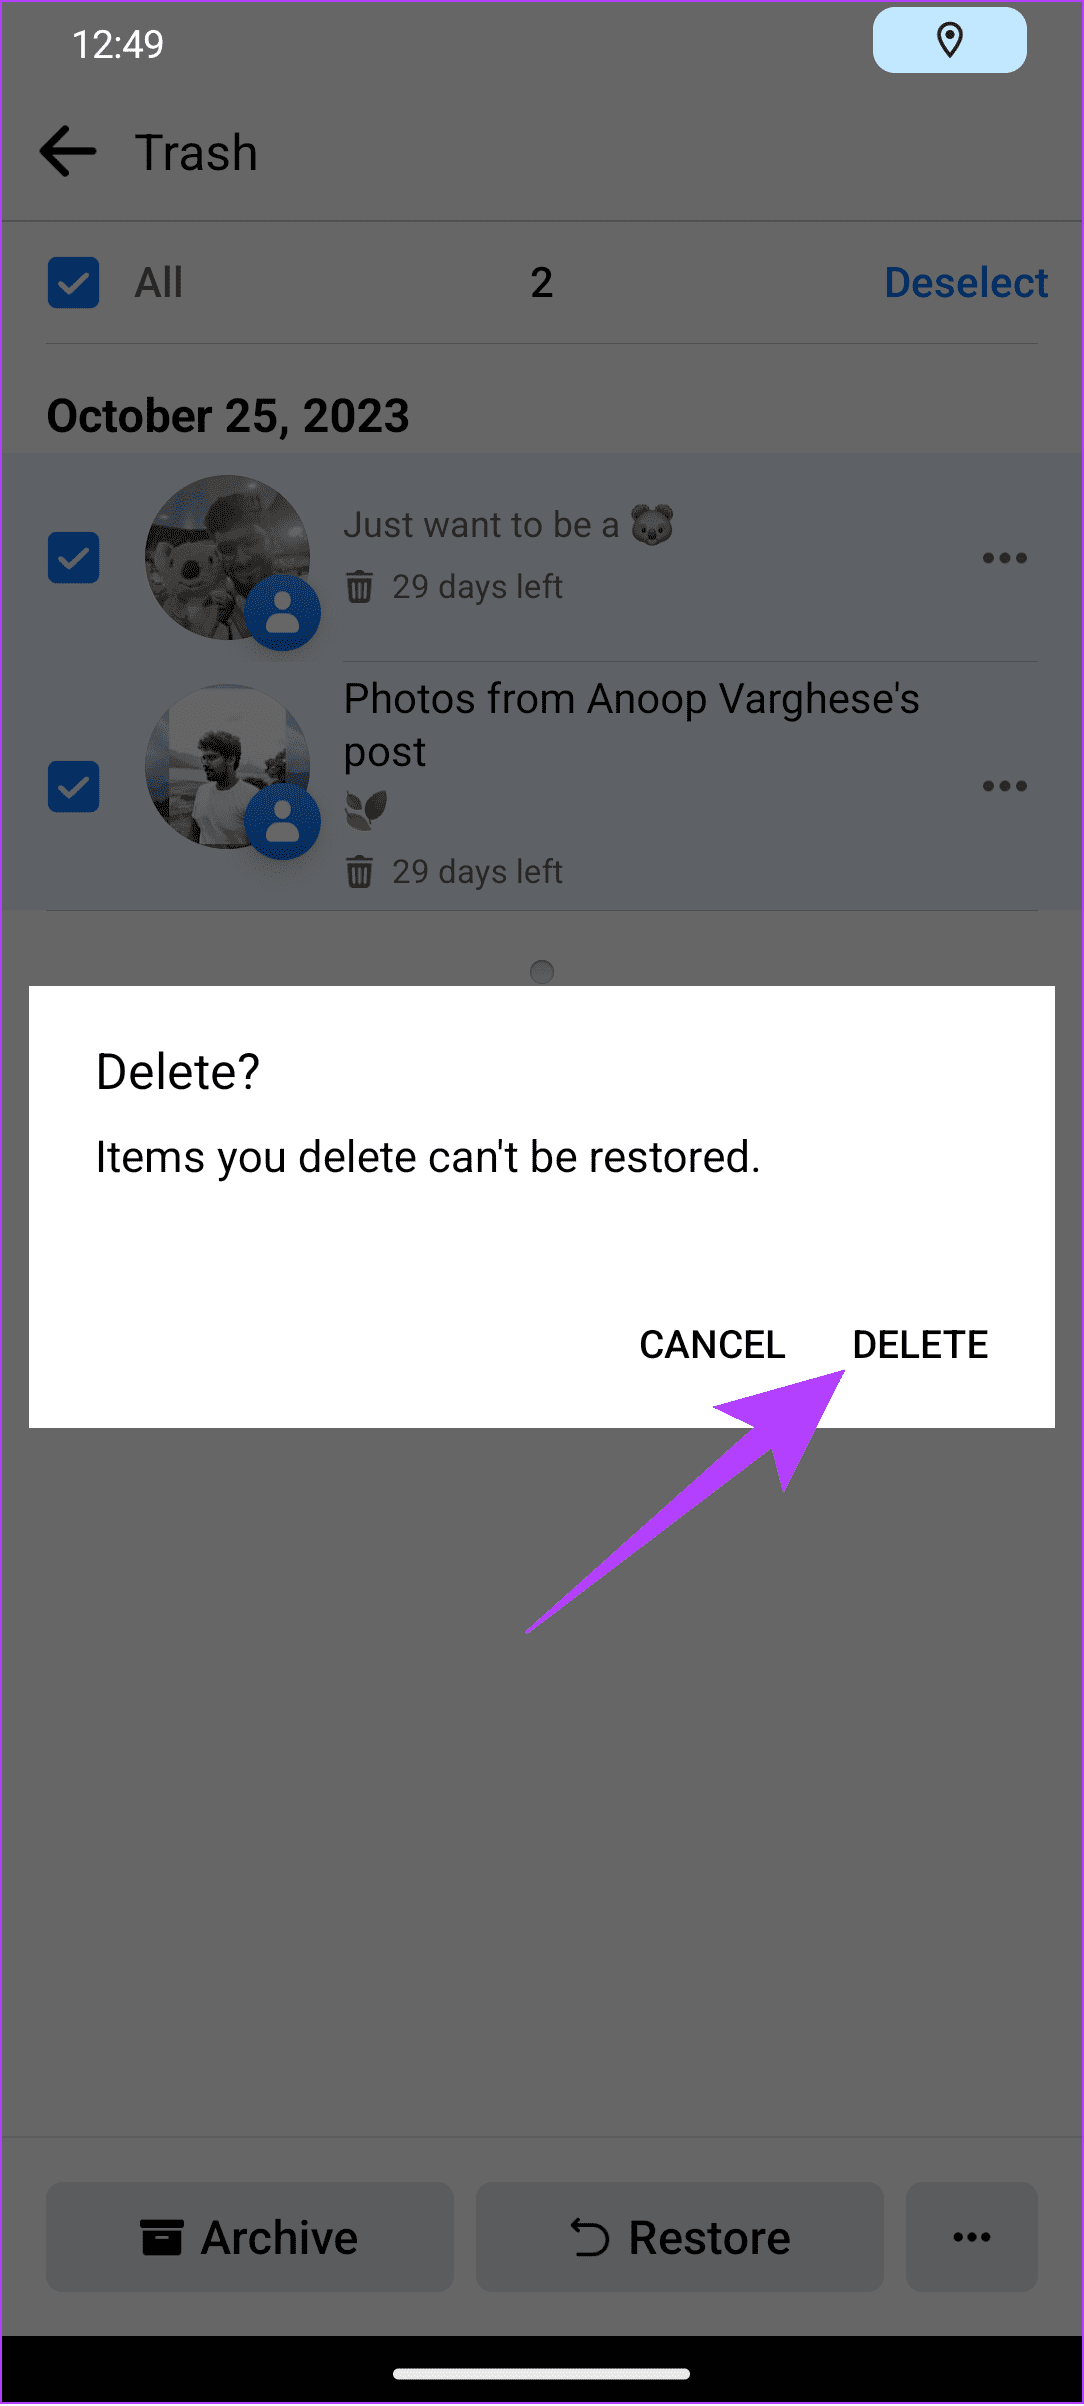 Choose Delete to confirm 4